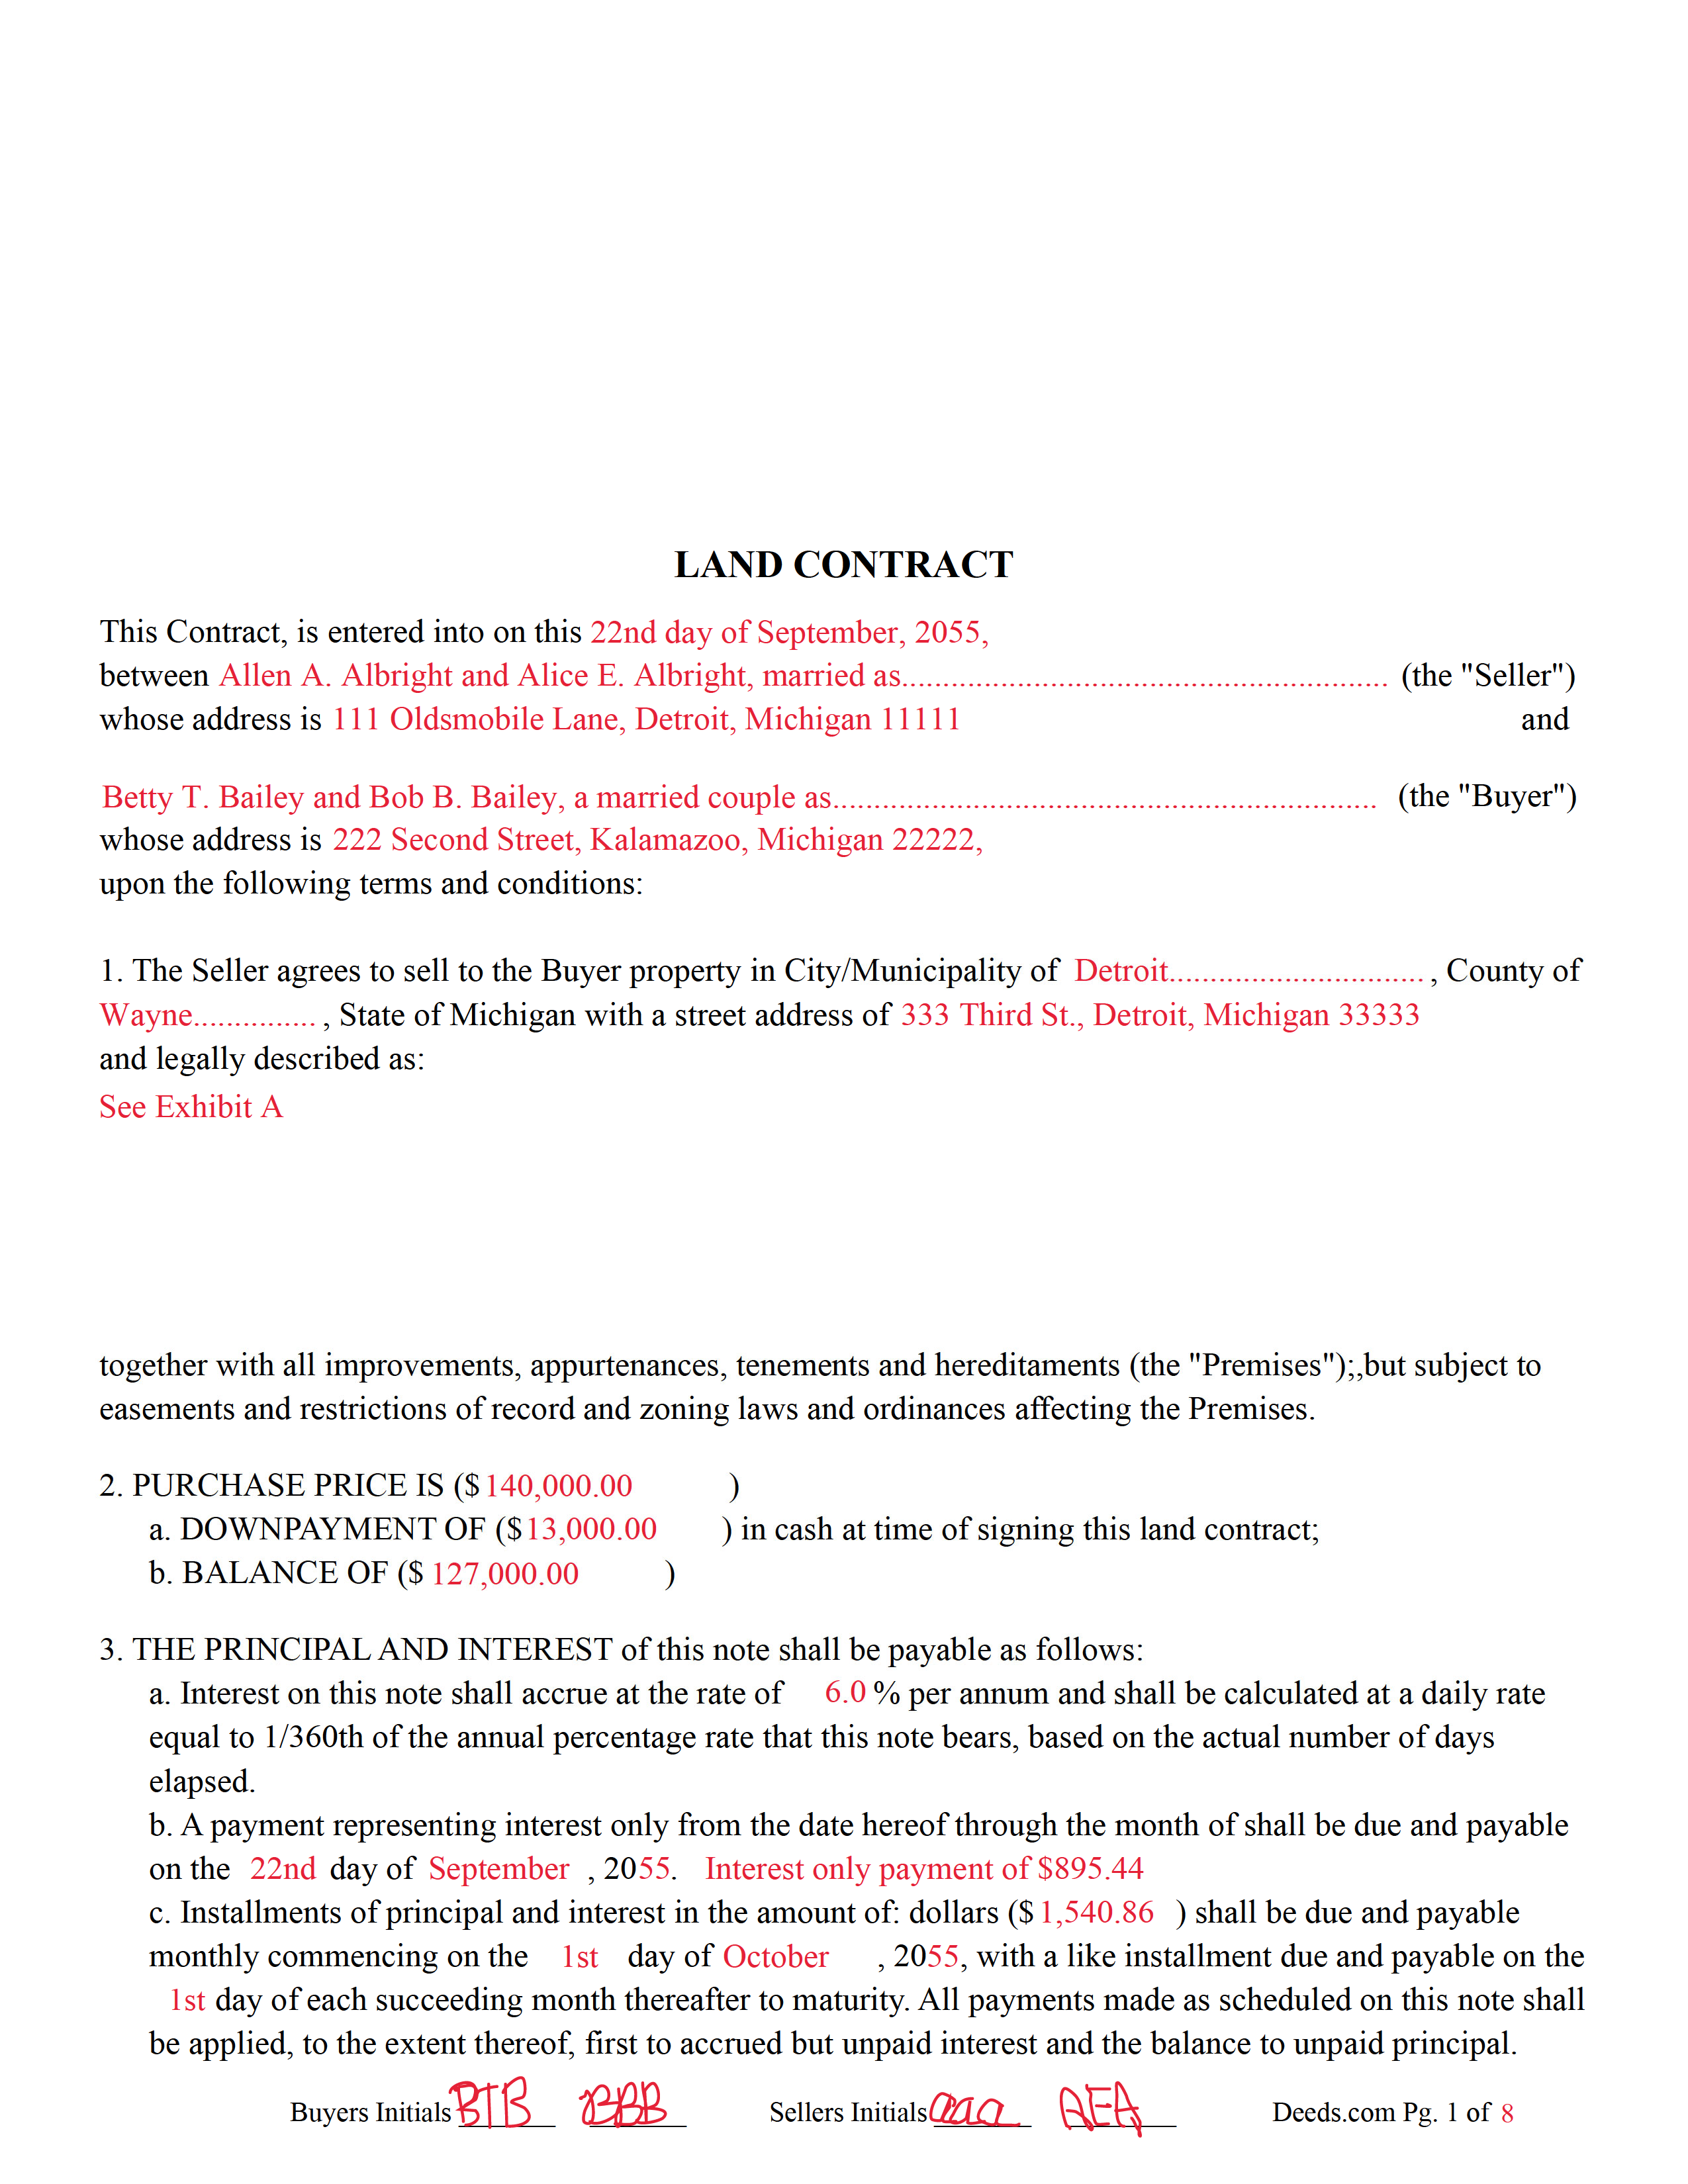 Completed Example of the Land Contract Document